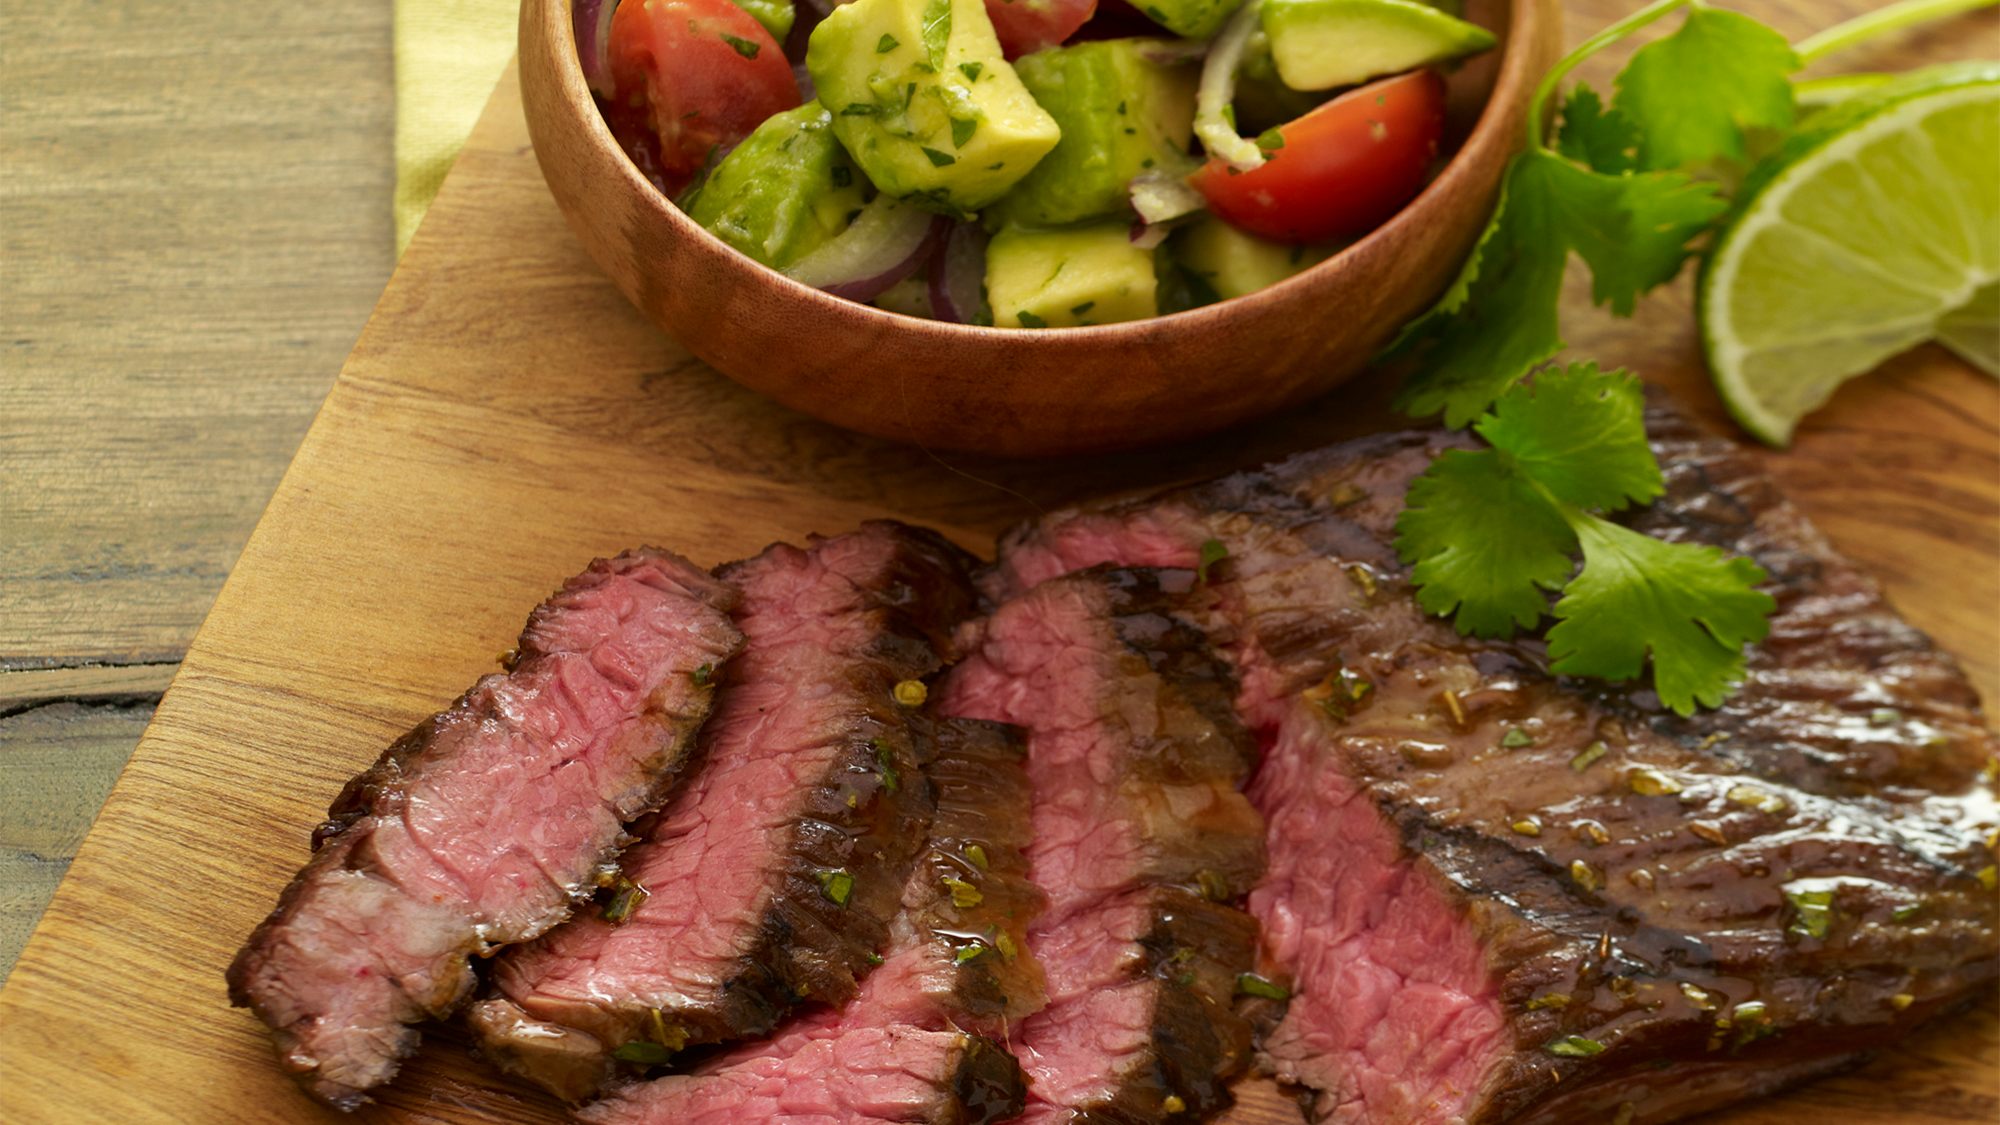 tequila-lime-steak-with-avocado-chopped-salad.jpg